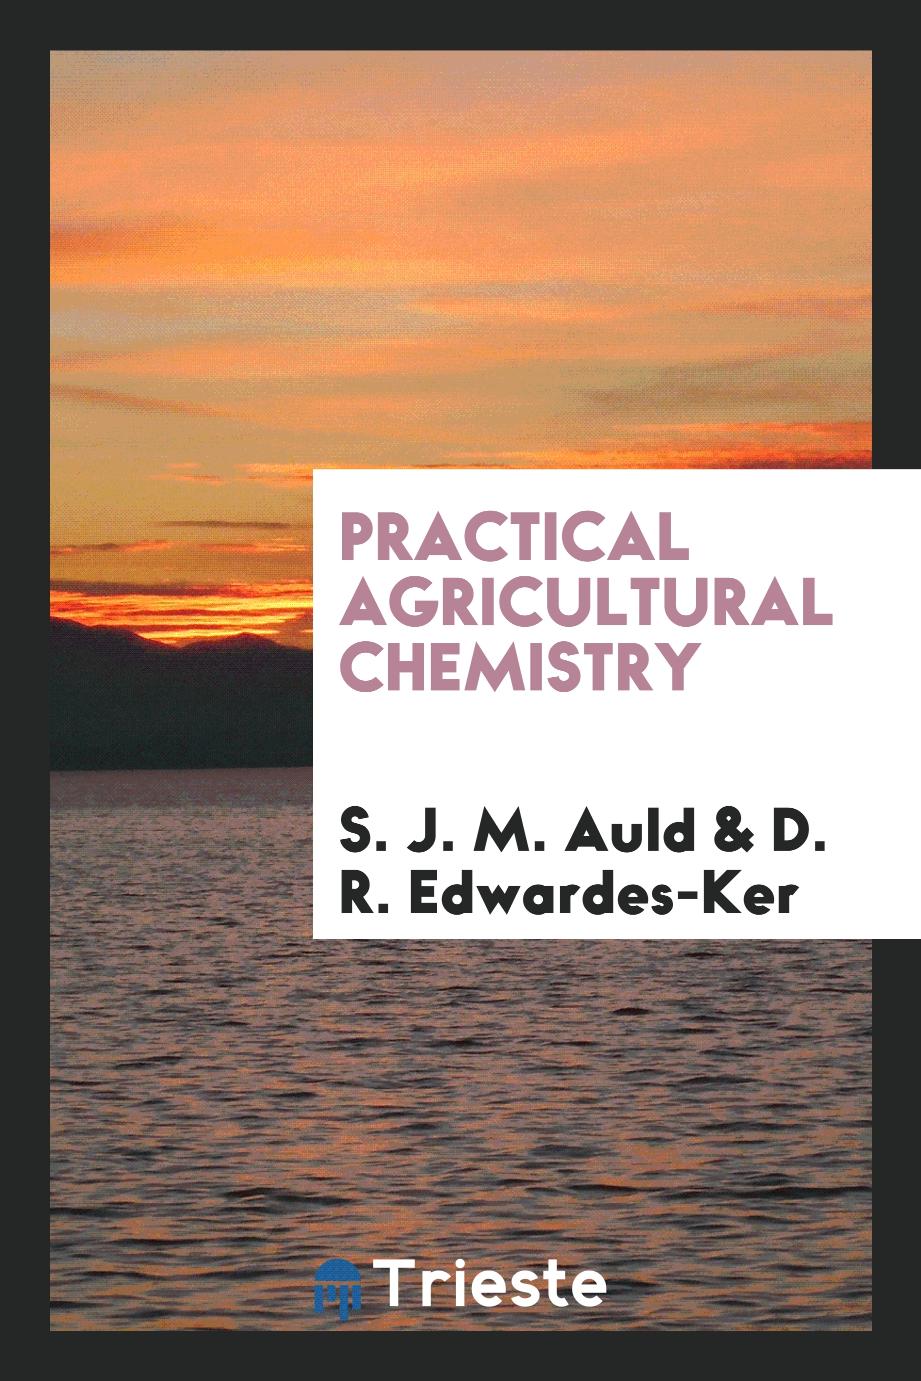 Practical agricultural chemistry